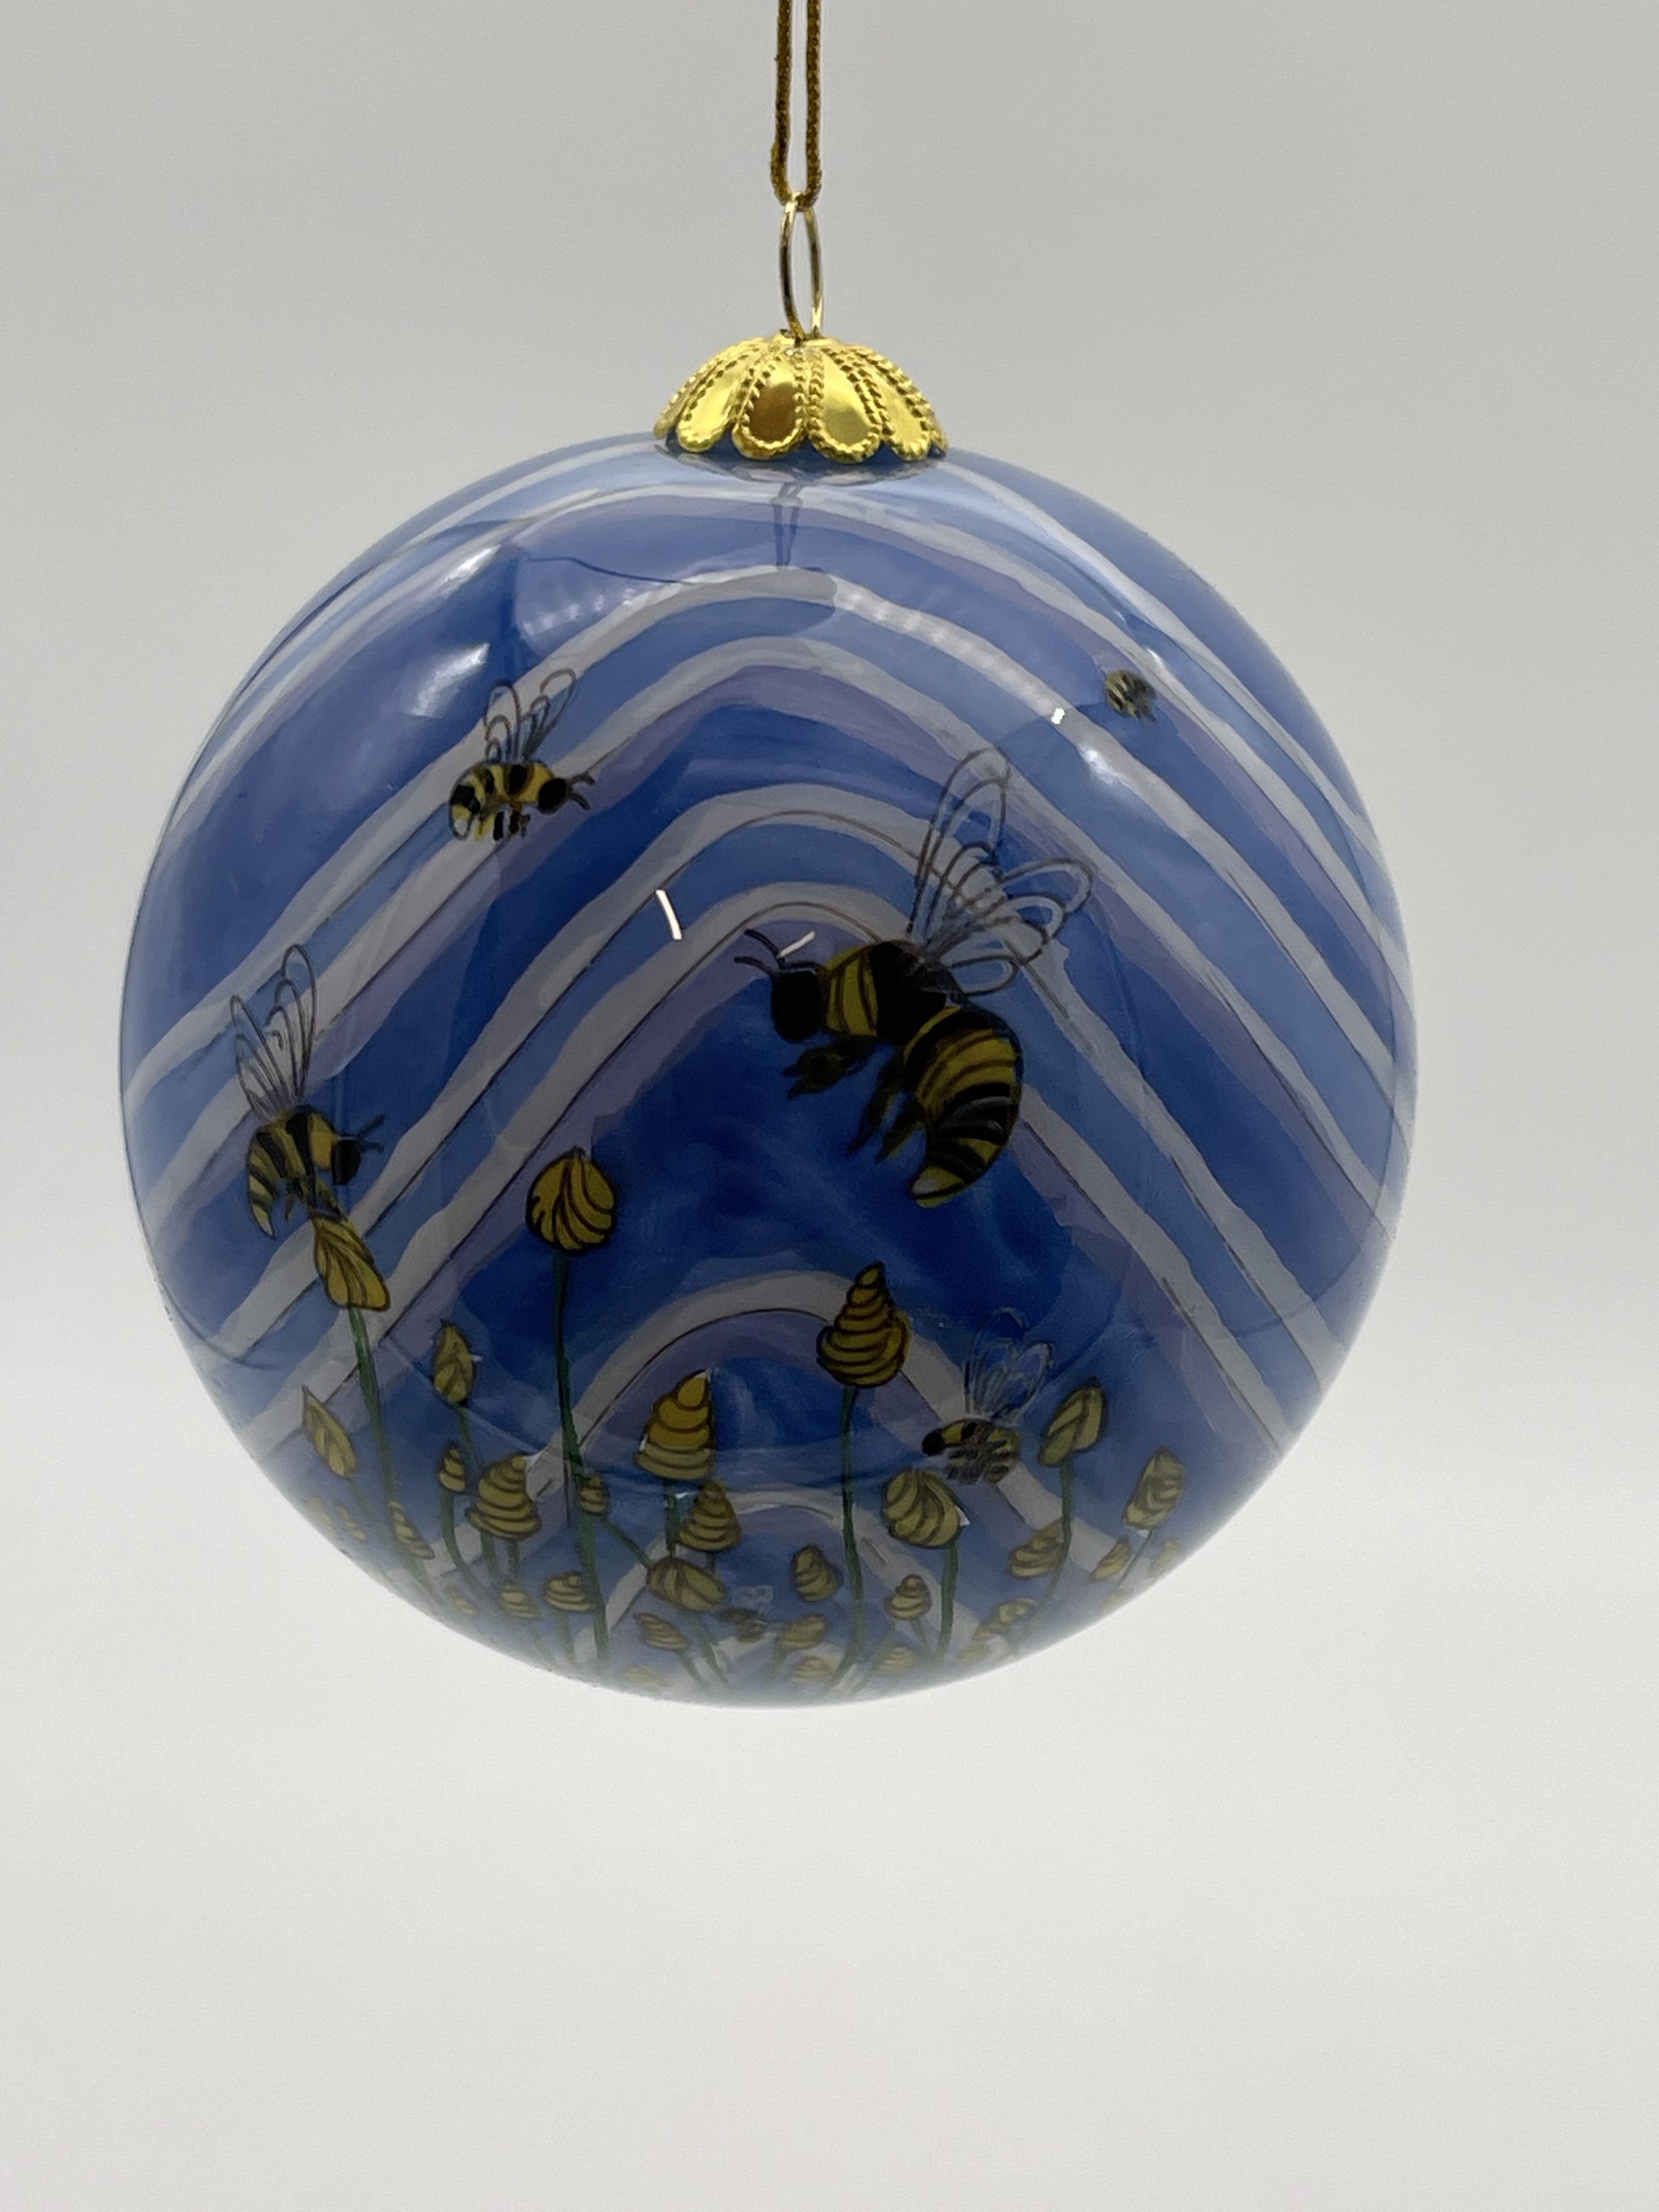 Flight of the Bees Ornament by Robbie Craig